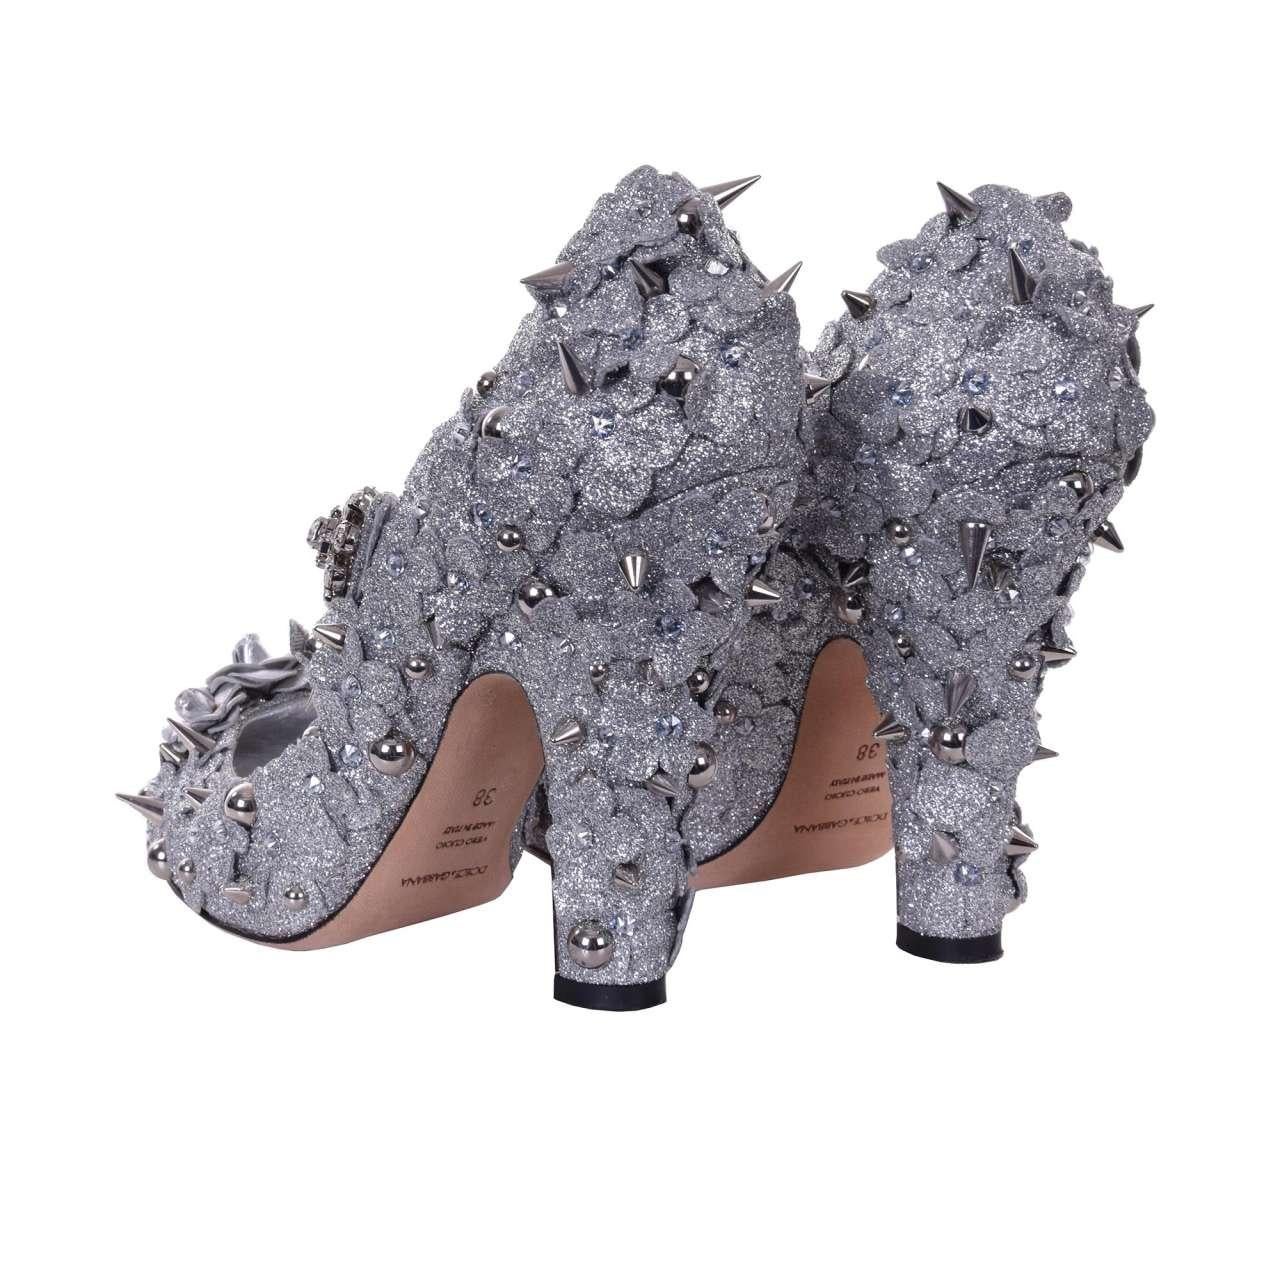 Dolce & Gabbana - Glitter Mary Jane Pumps COCO Silver EUR 36 For Sale 2